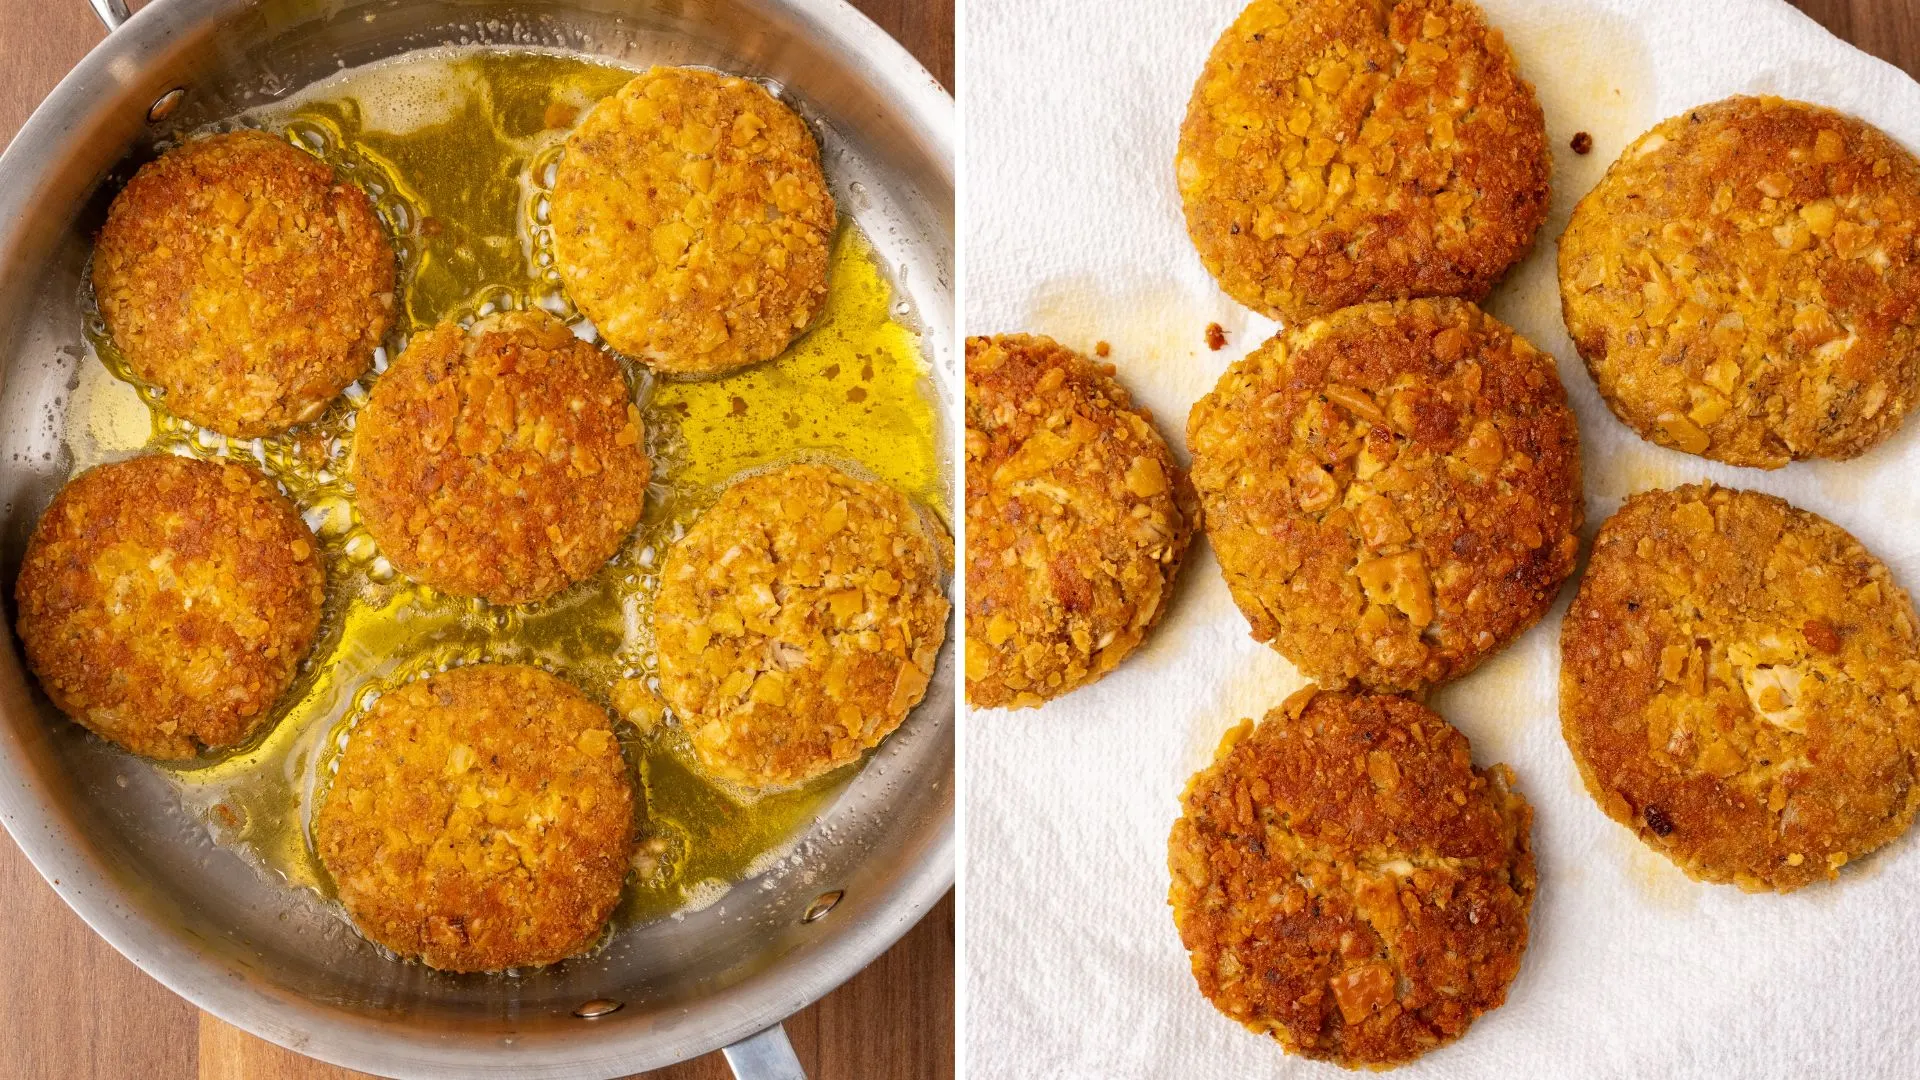 Five salmon patties are frying in the oil, then they are moved to a plate covered with a paper towel to rest.